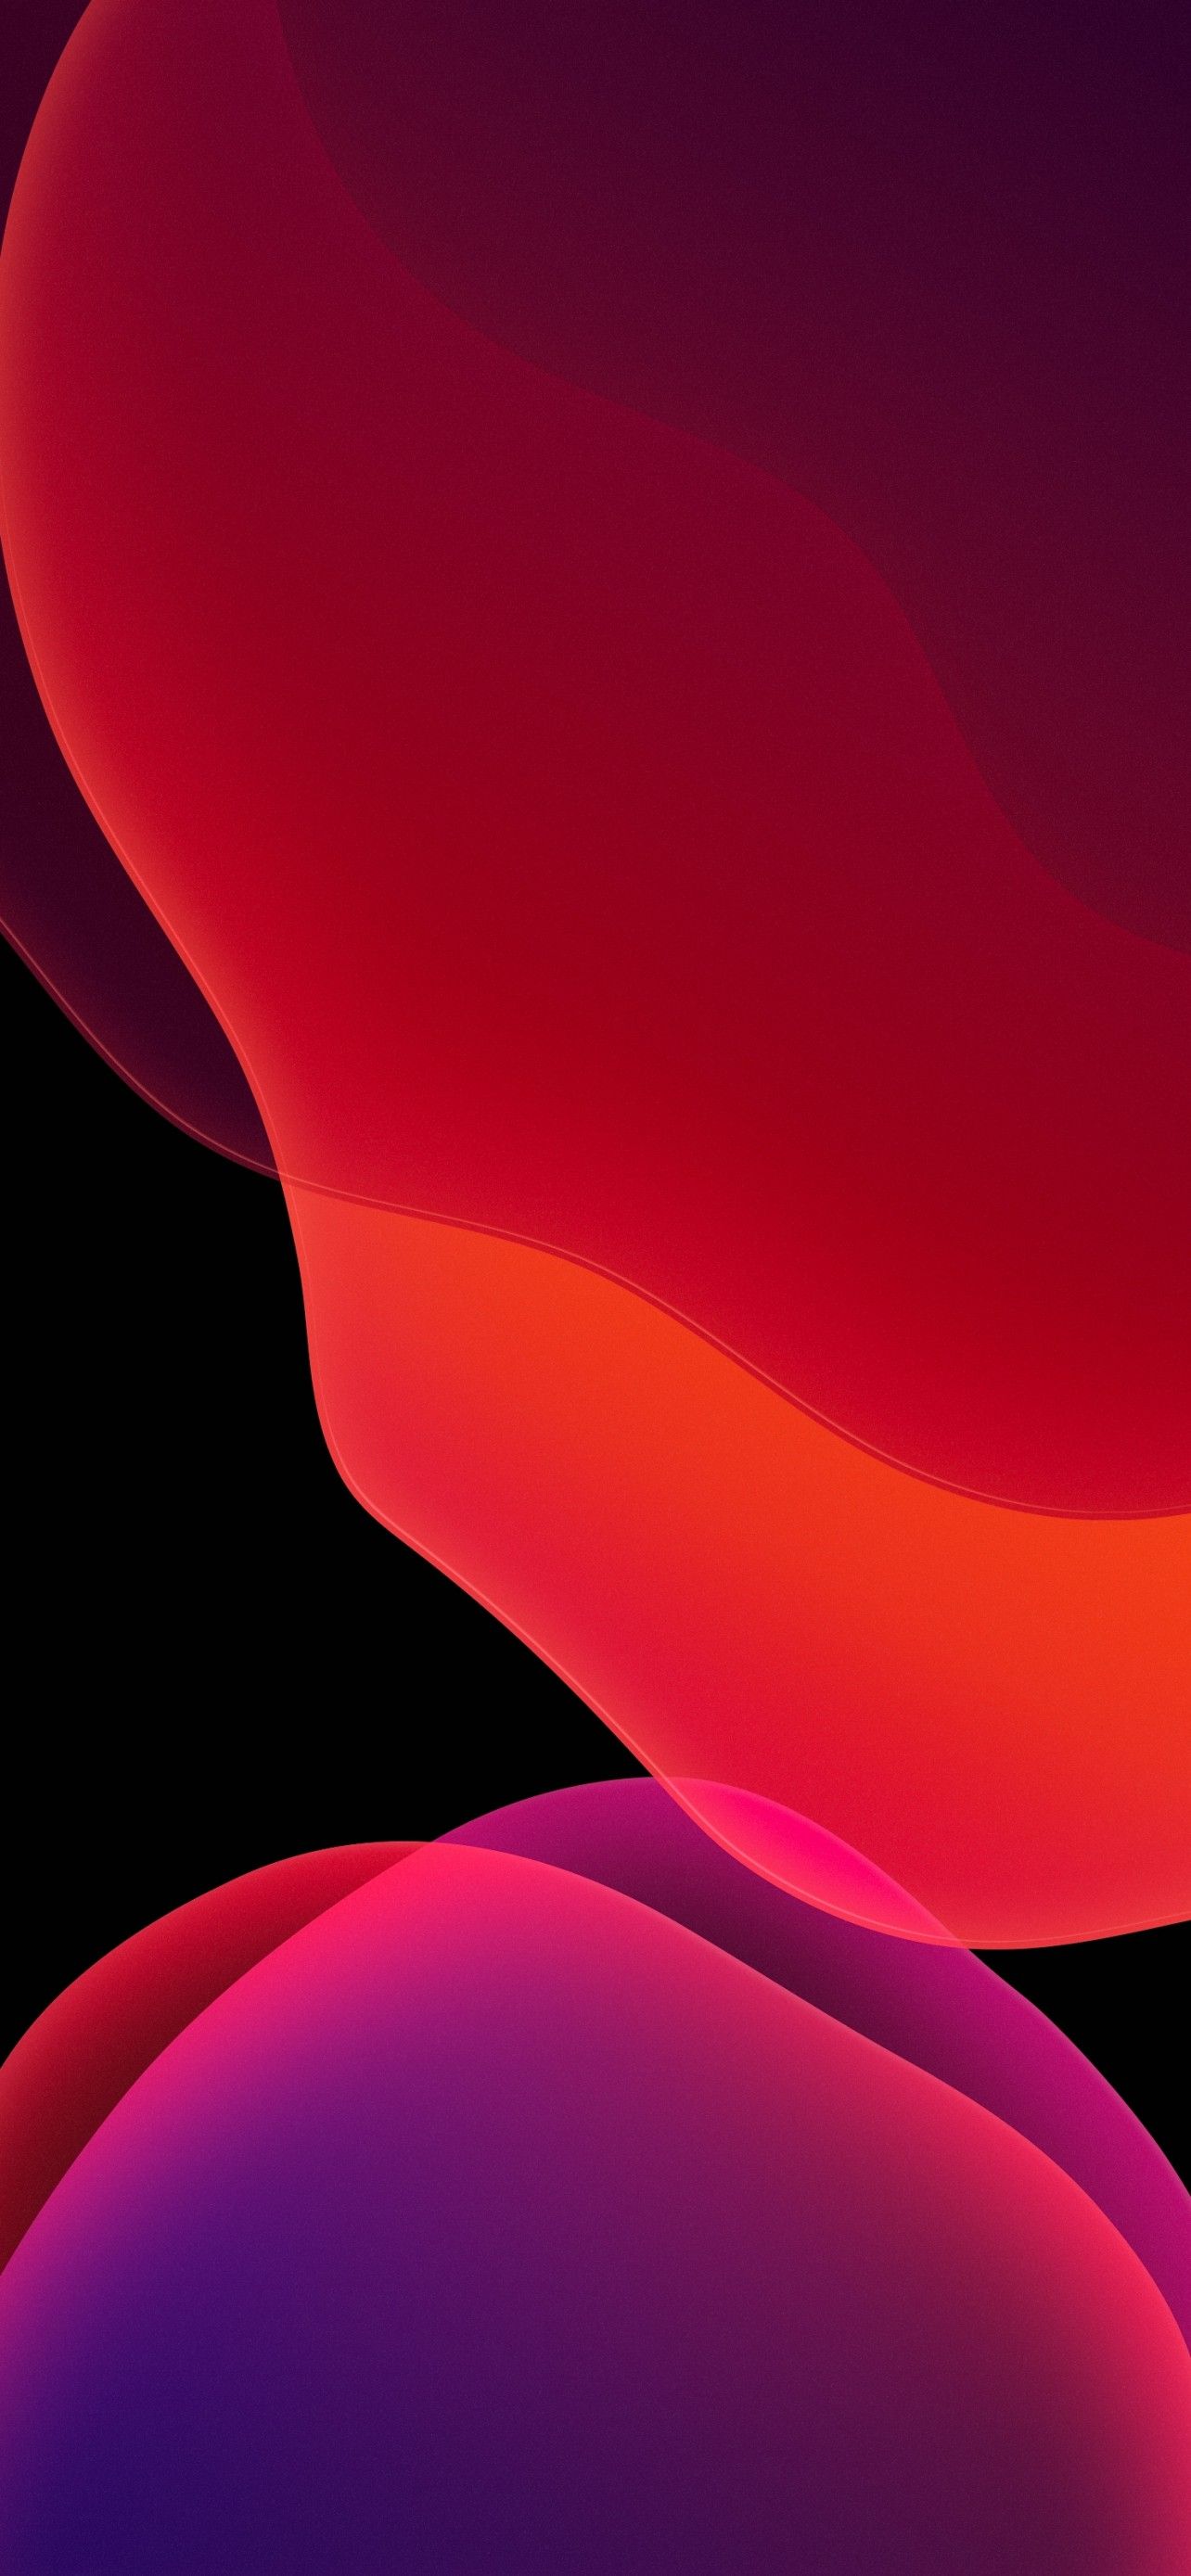 iOS 13 Wallpaper 4K, Stock, iPadOS, Red, Black background, AMOLED, Abstract